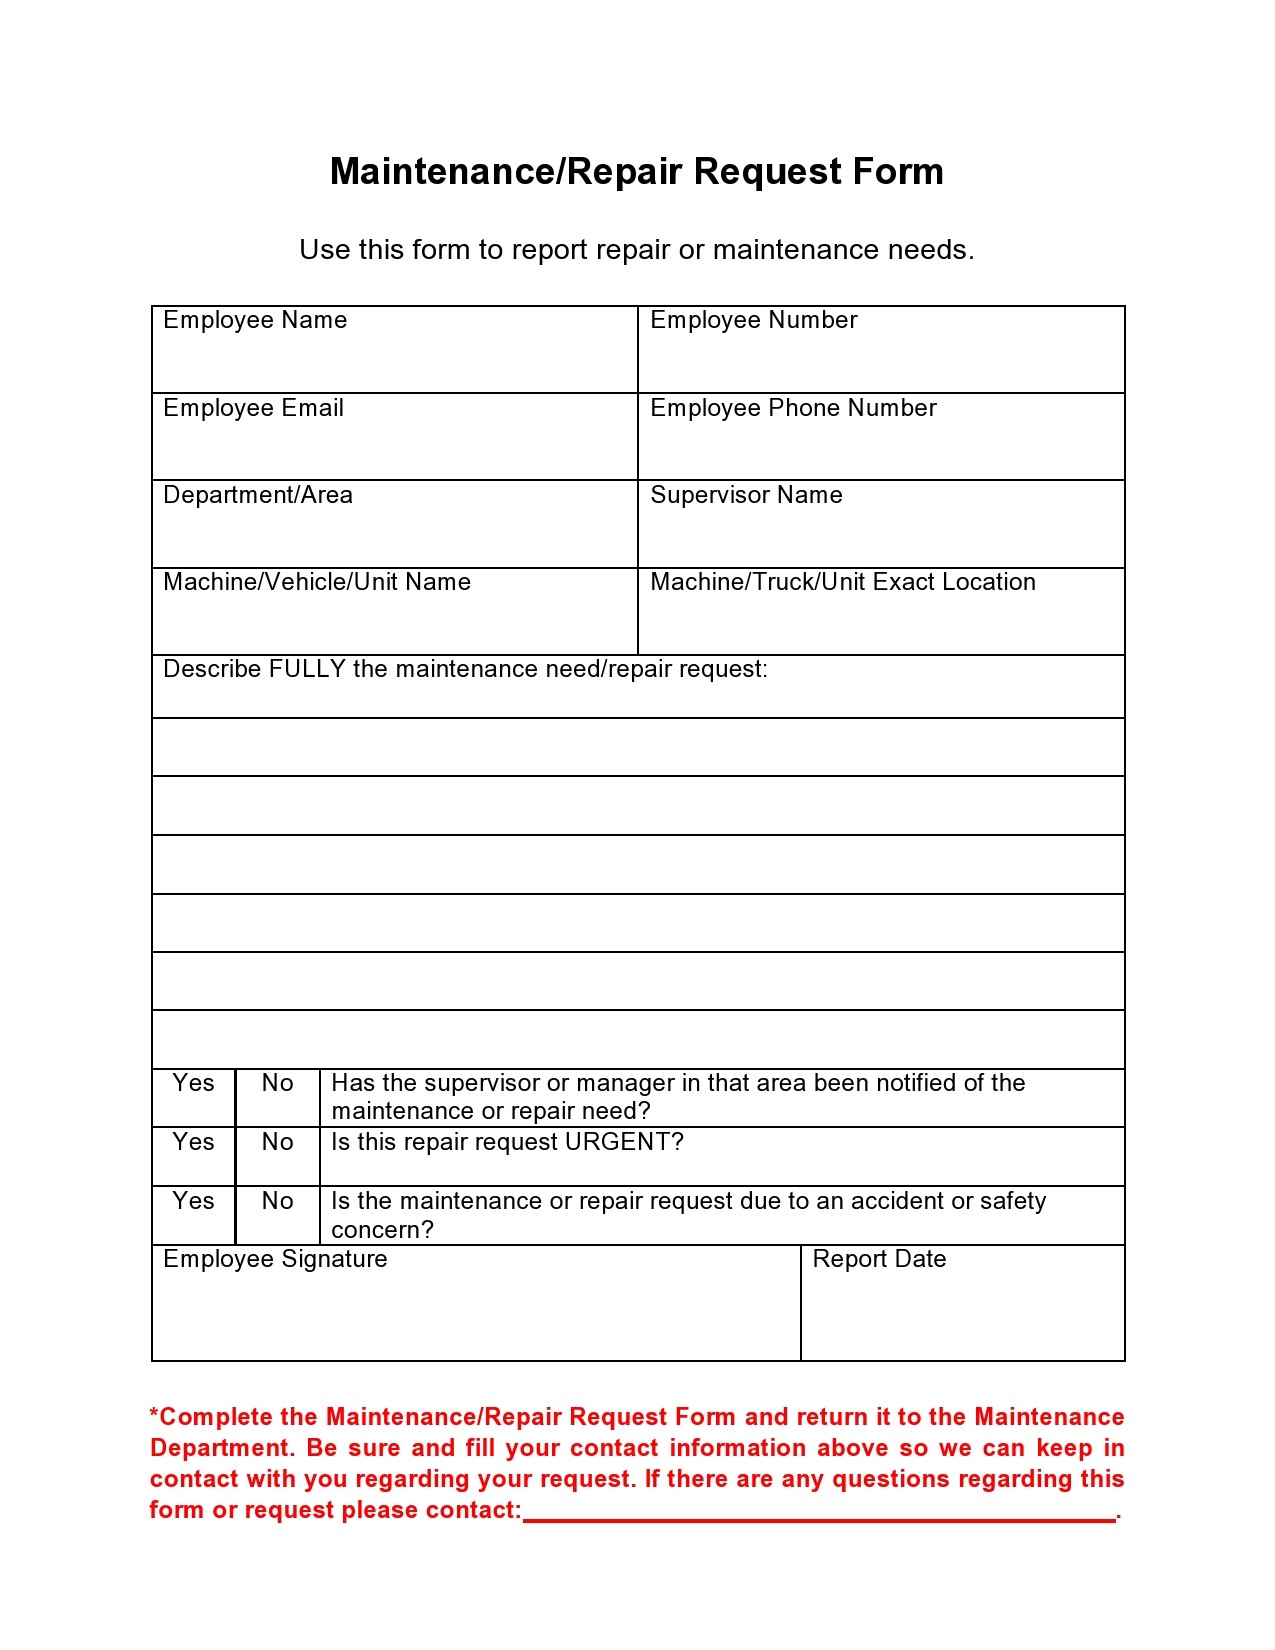 fillable-maintenance-request-form-printable-forms-free-online